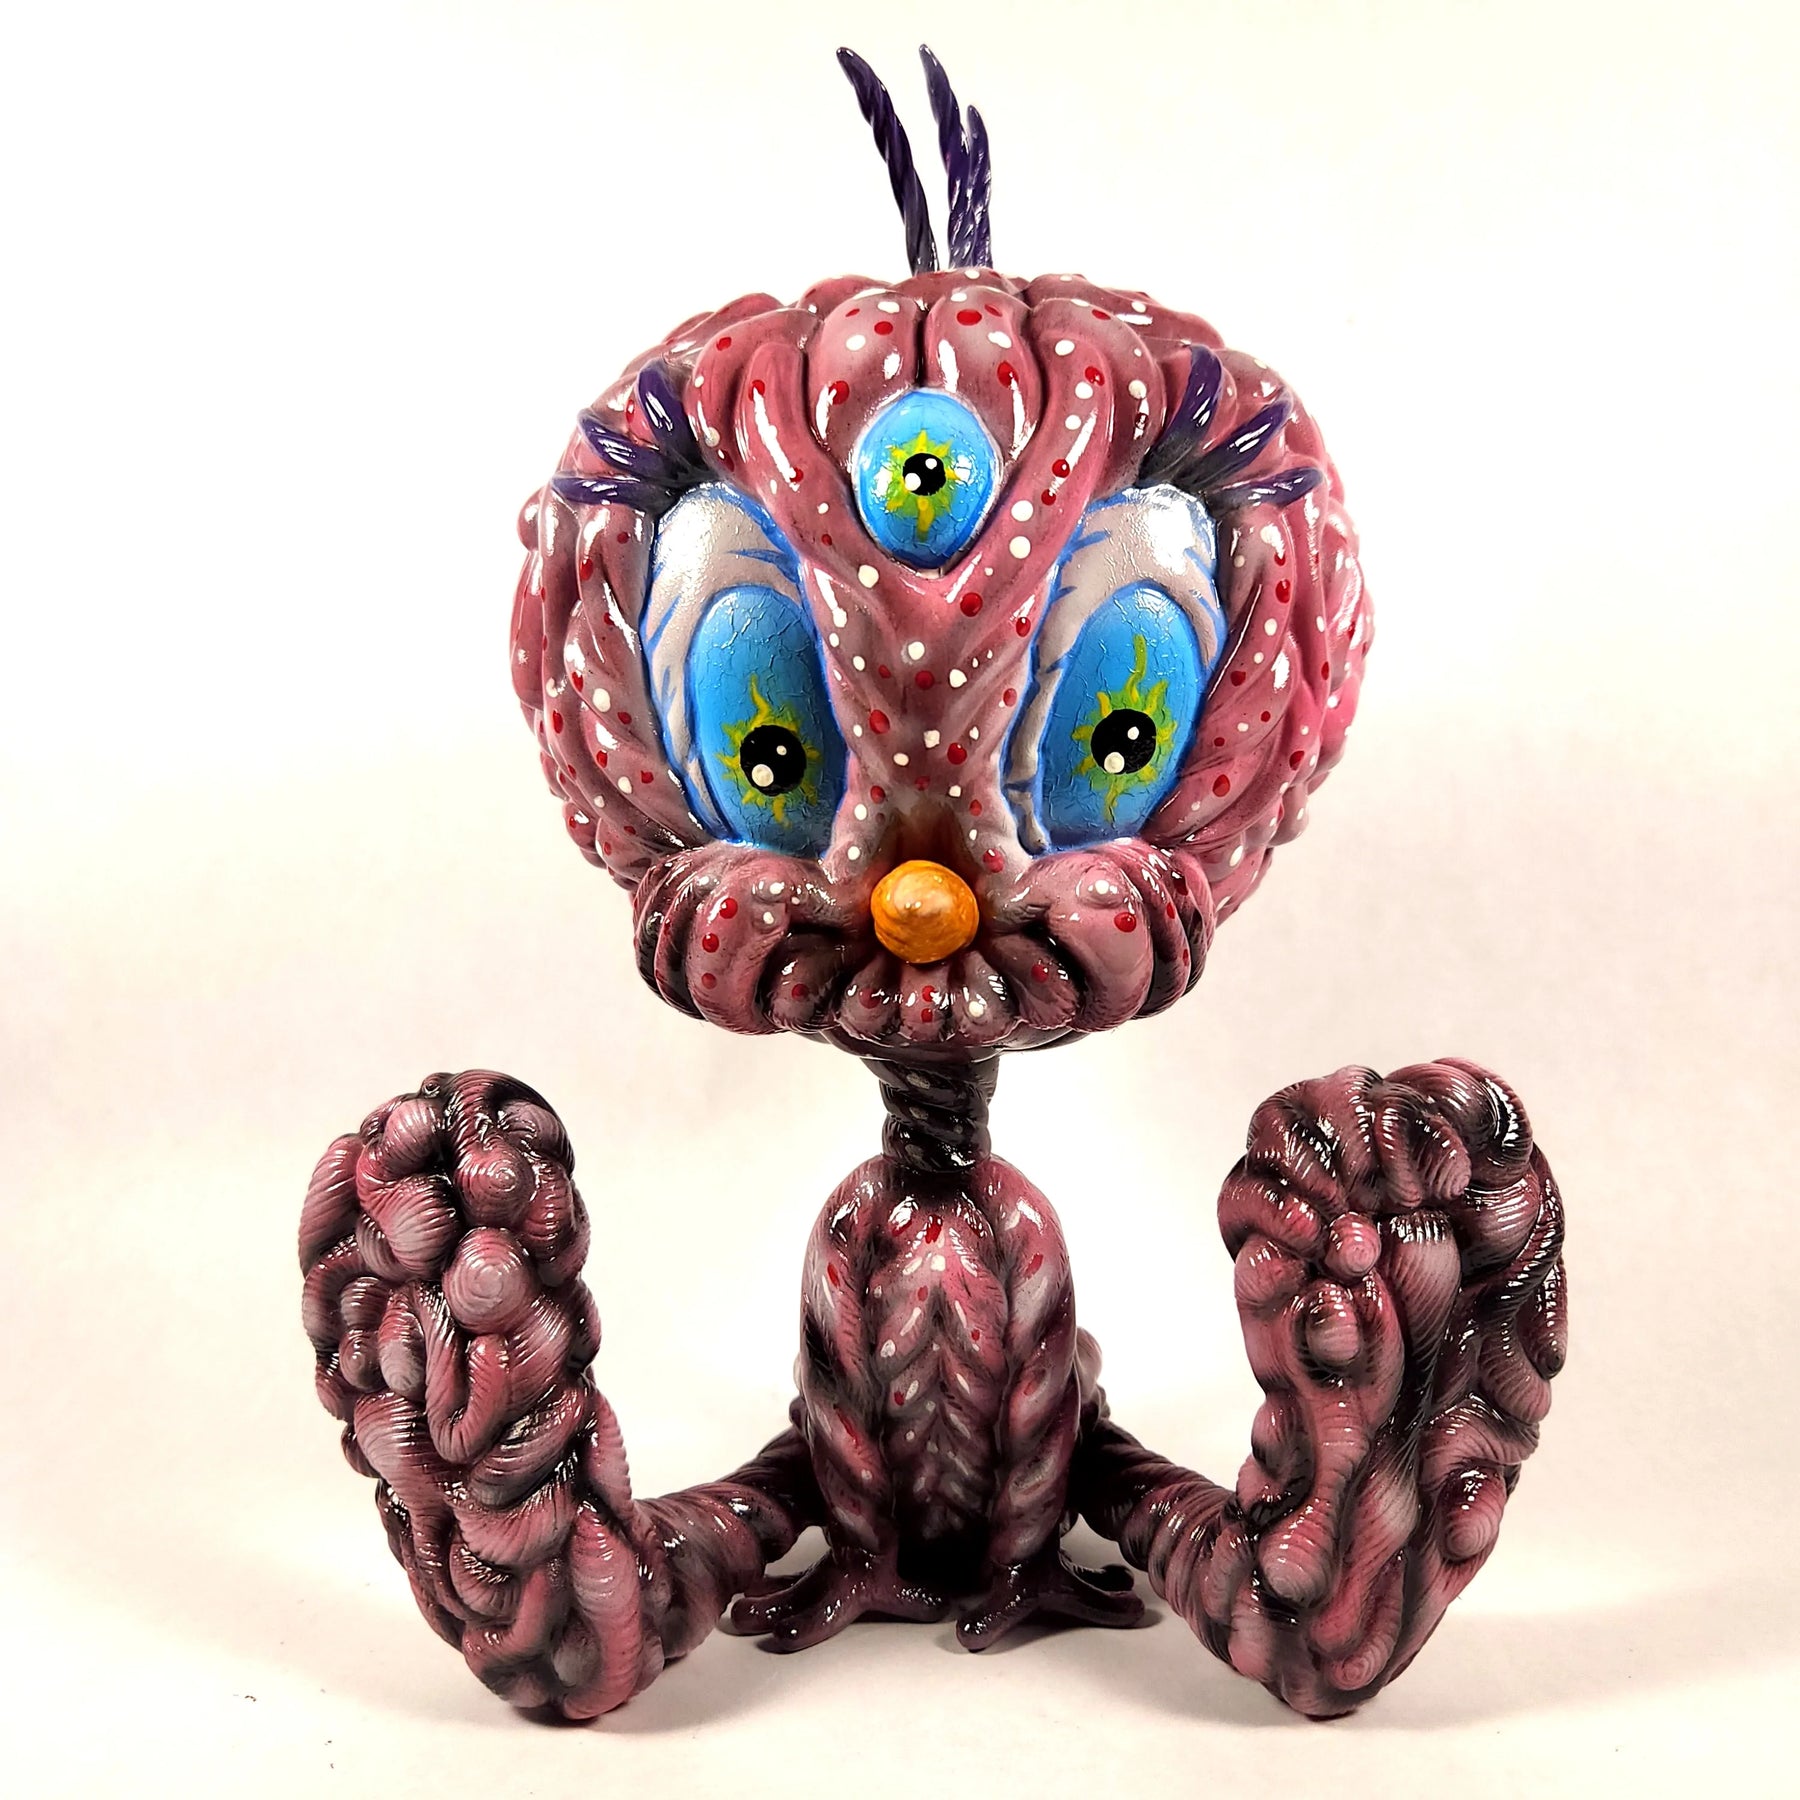 Bird Brain Custom by Forces of Dorkness Available Now